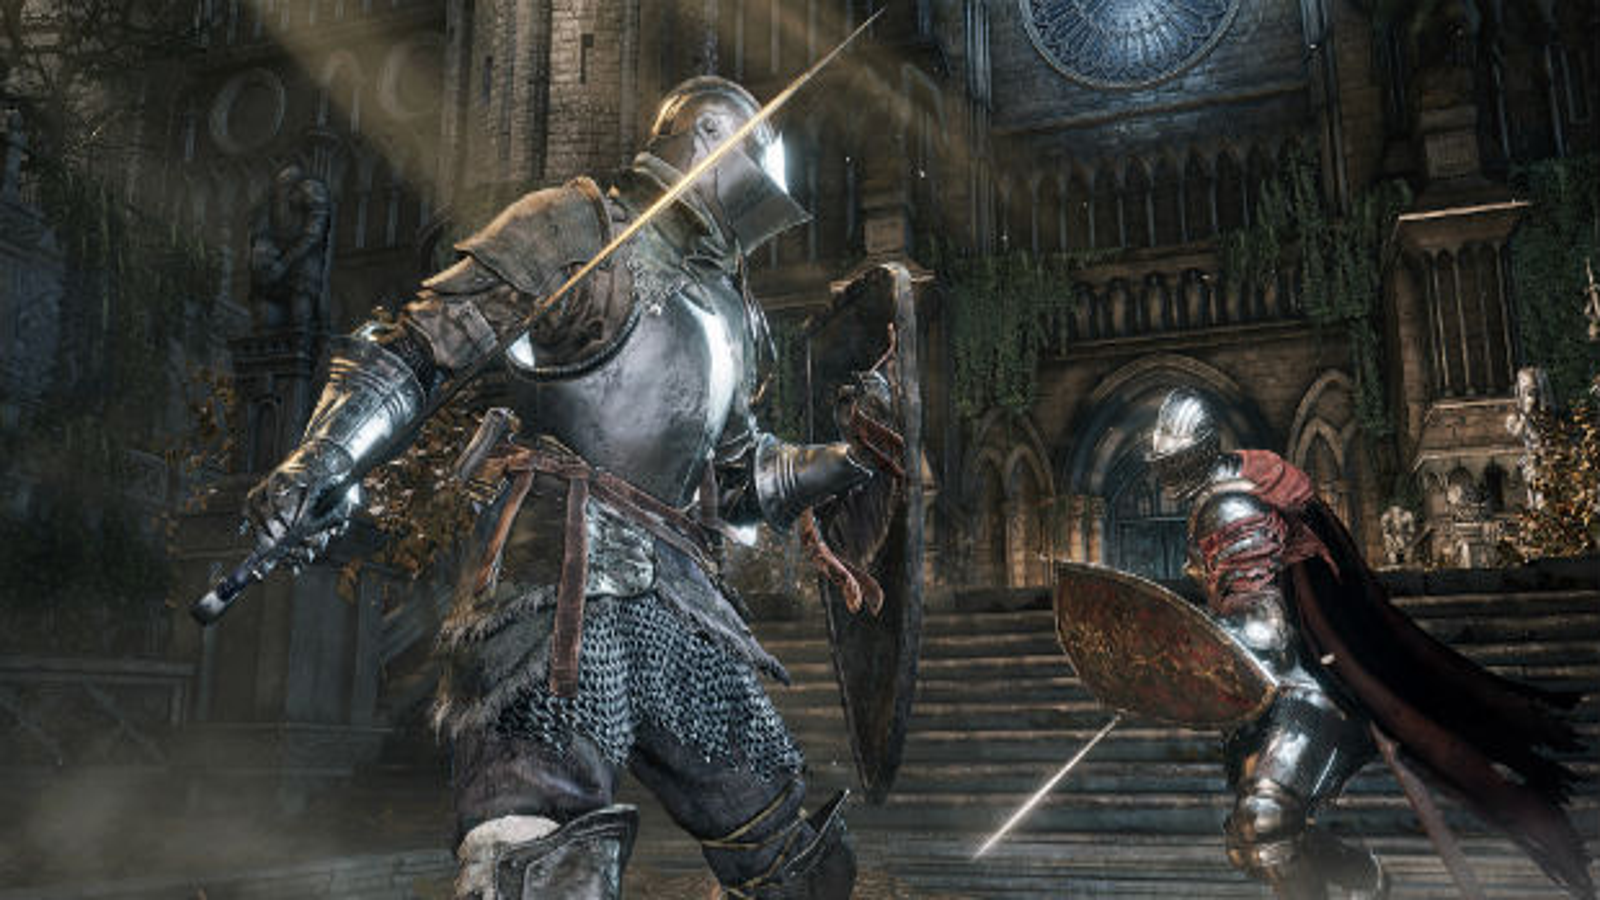 Bored of Dark Souls? These are the best Souls-like games on Xbox One